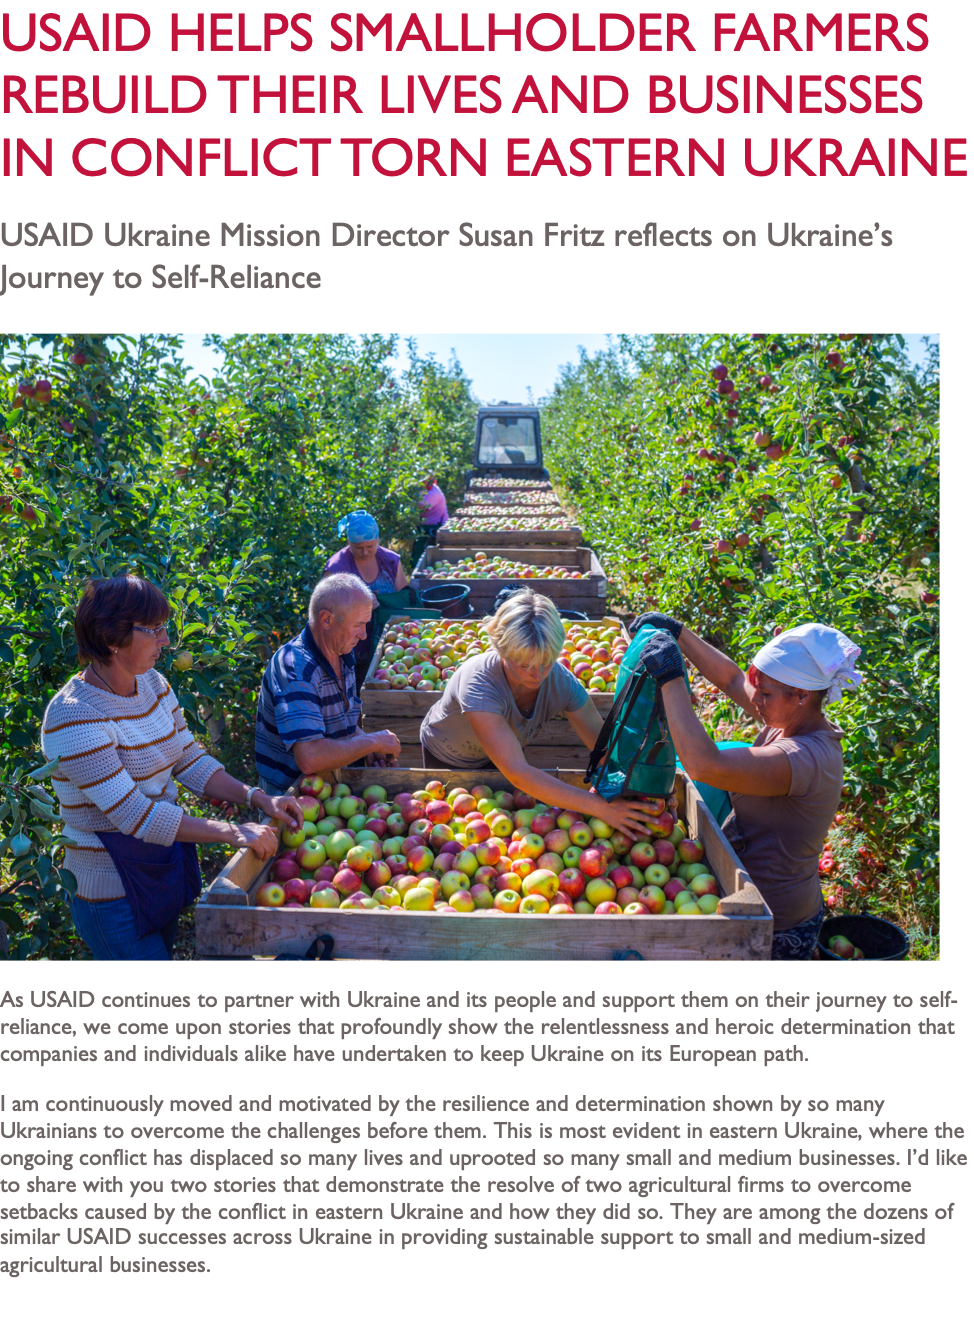 USAID Helps Smallholder Farmers Rebuild Their Lives and Businesses in Conflict Torn Eastern Ukraine